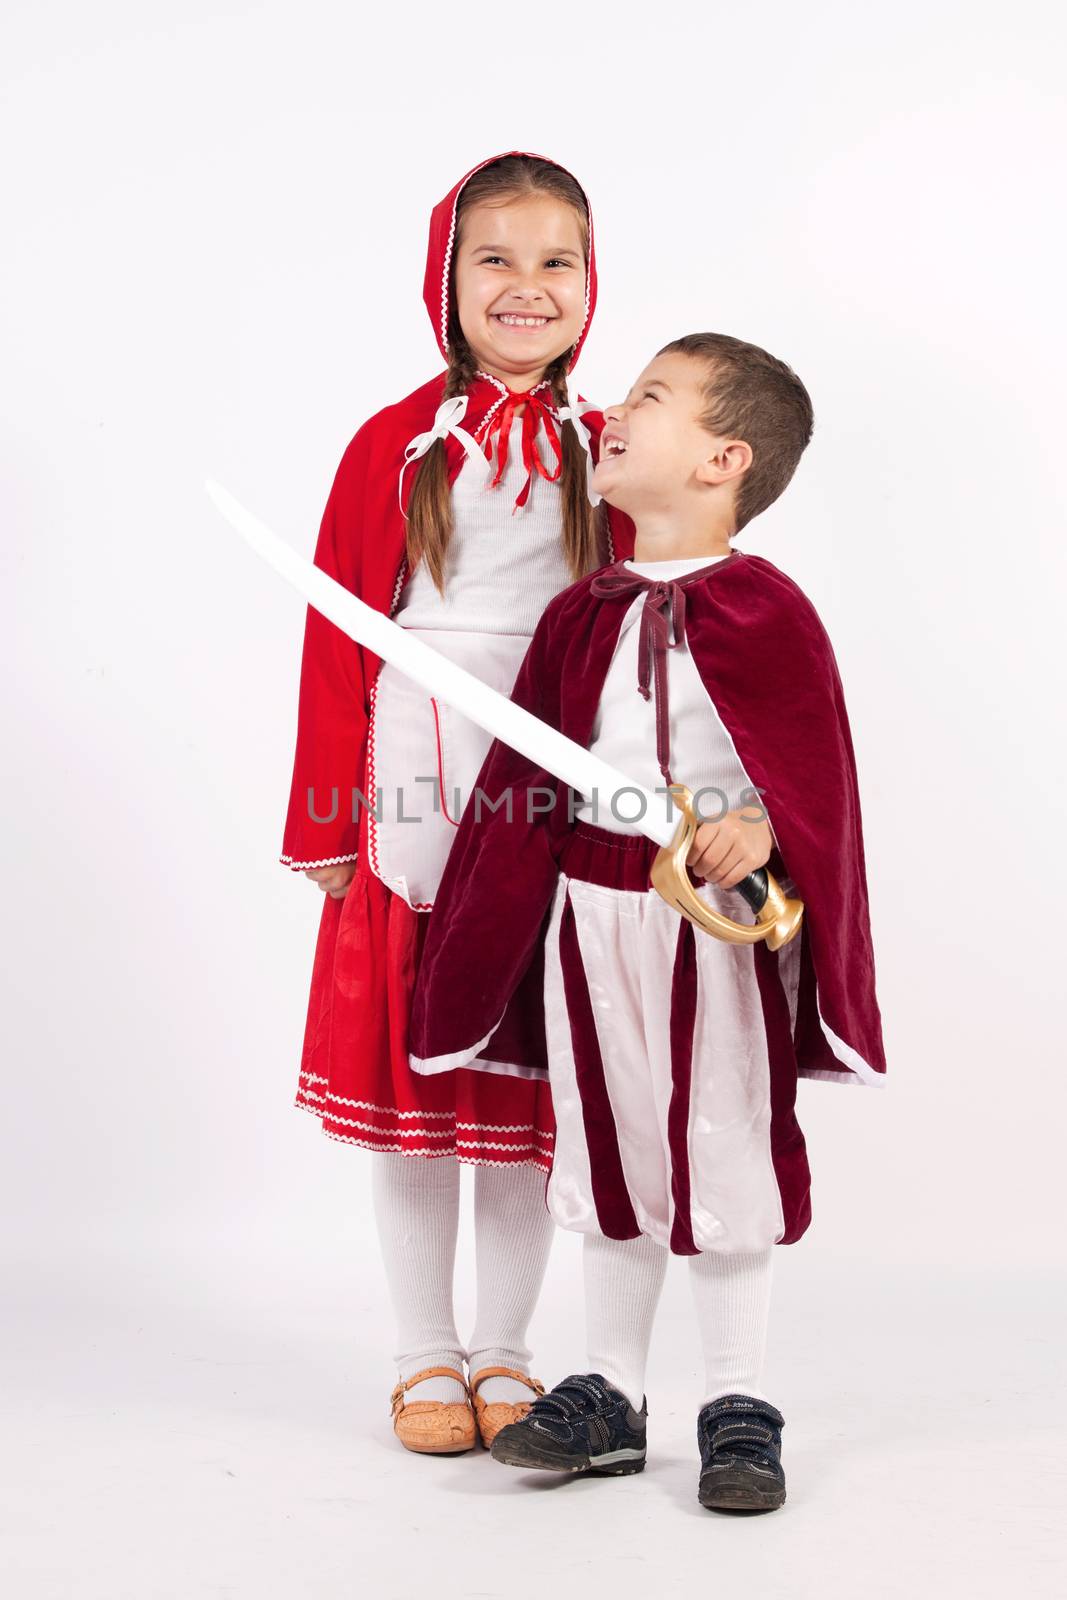 Girl and boy in costumes from fairy tales by maros_b